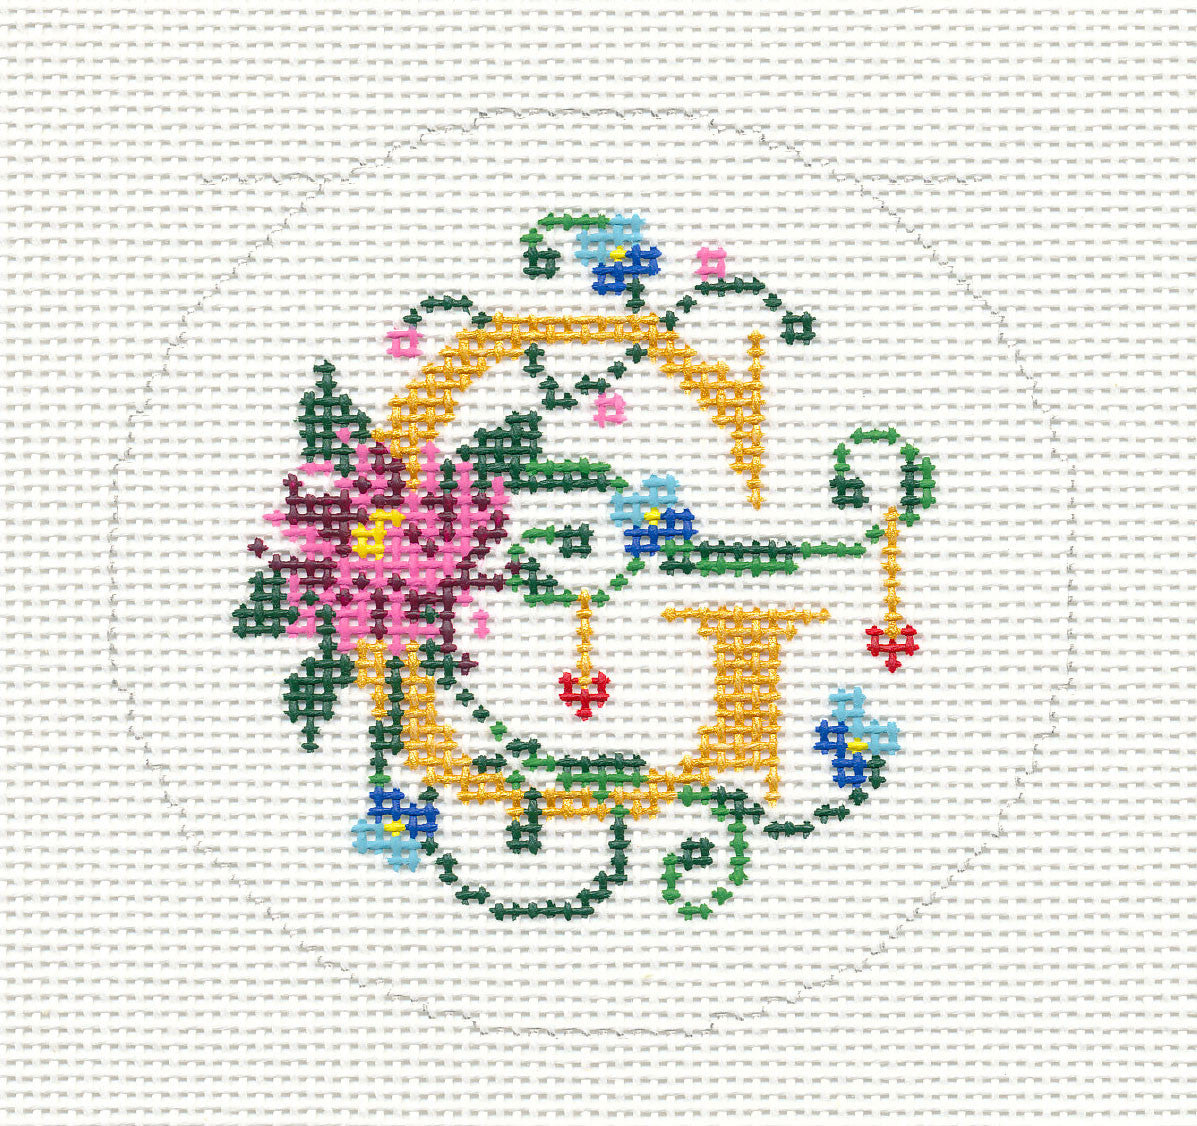 Alphabet ~ Letter "G" Floral Design handpainted Needlepoint Canvas 3" Rd. 18 mesh by Lee